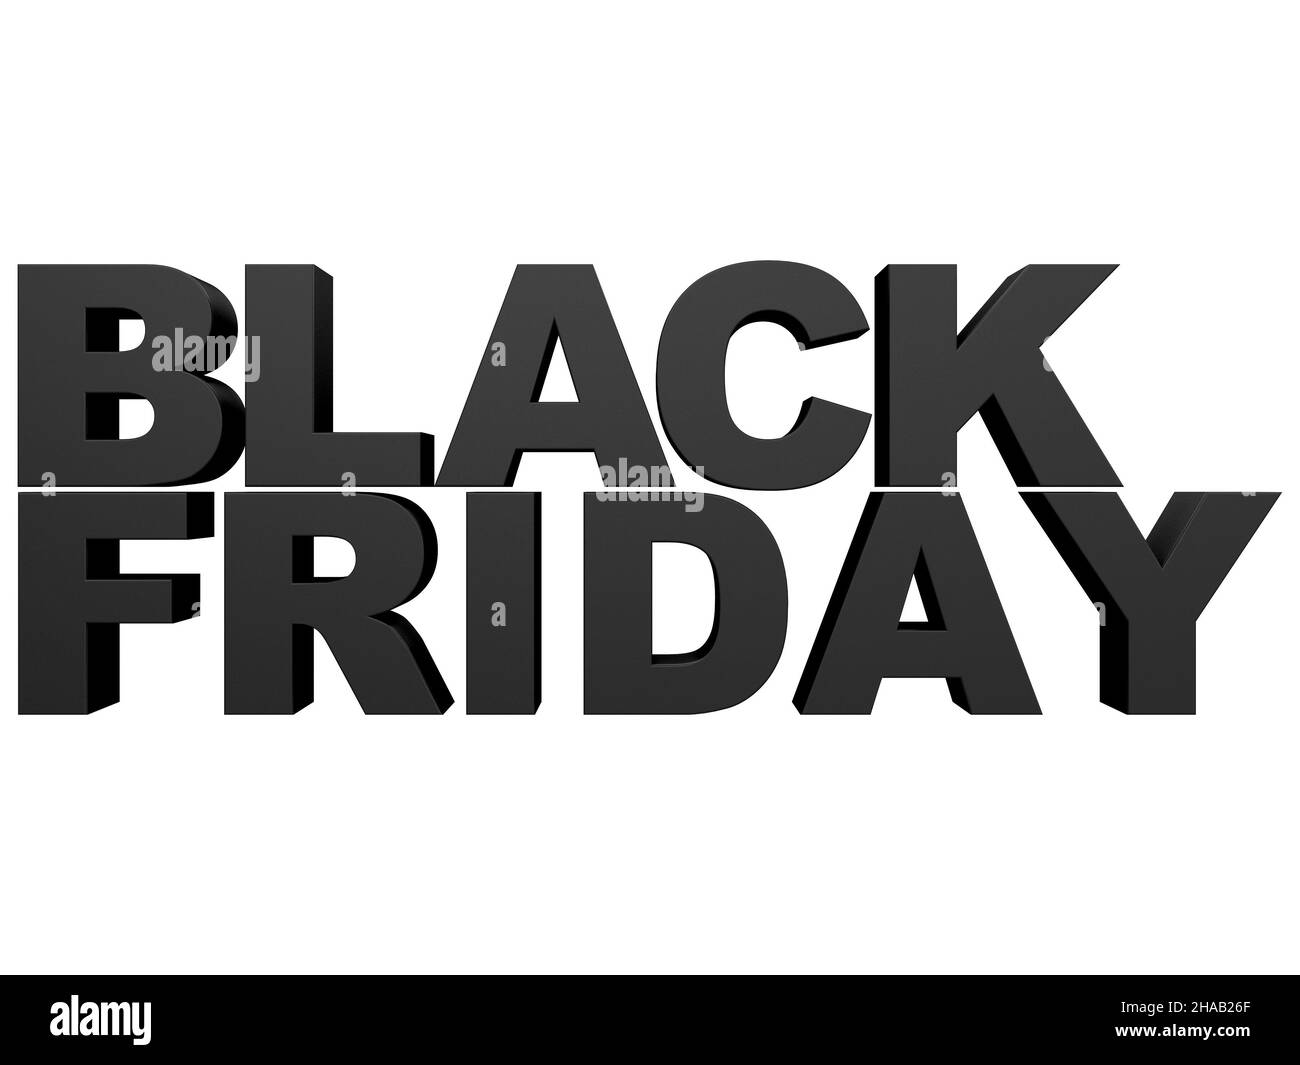 A 3D rendering of the text "Black Friday" on white background Stock Photo